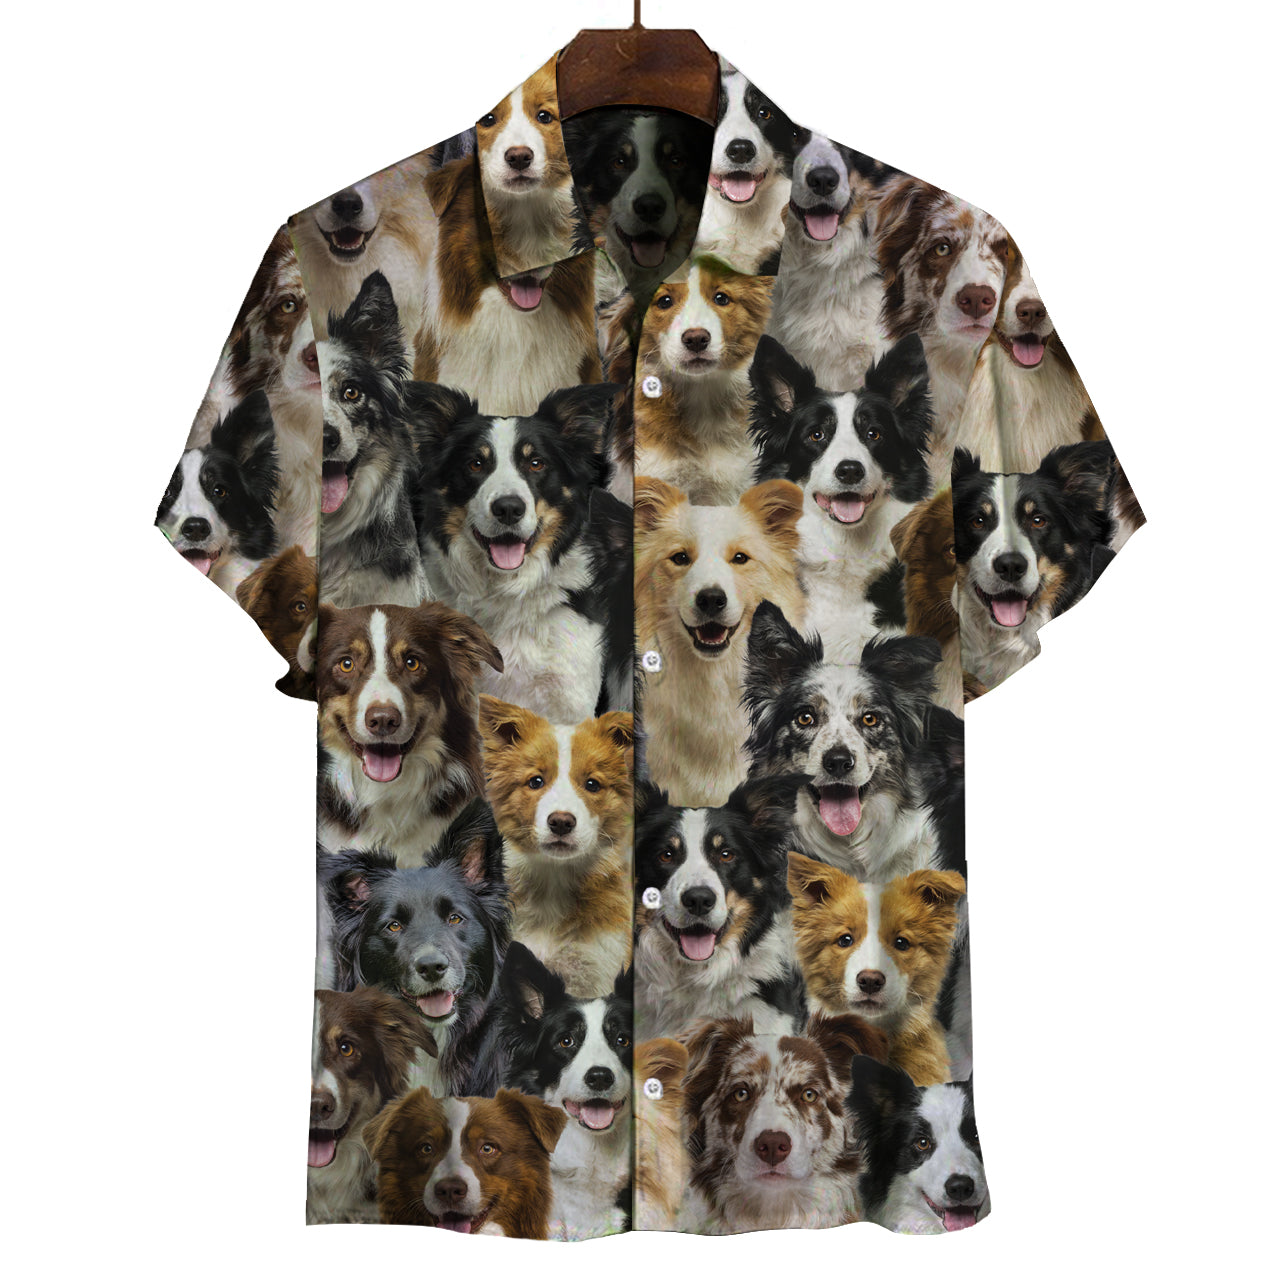 You Will Have A Bunch Of Border Collies - Shirt V1